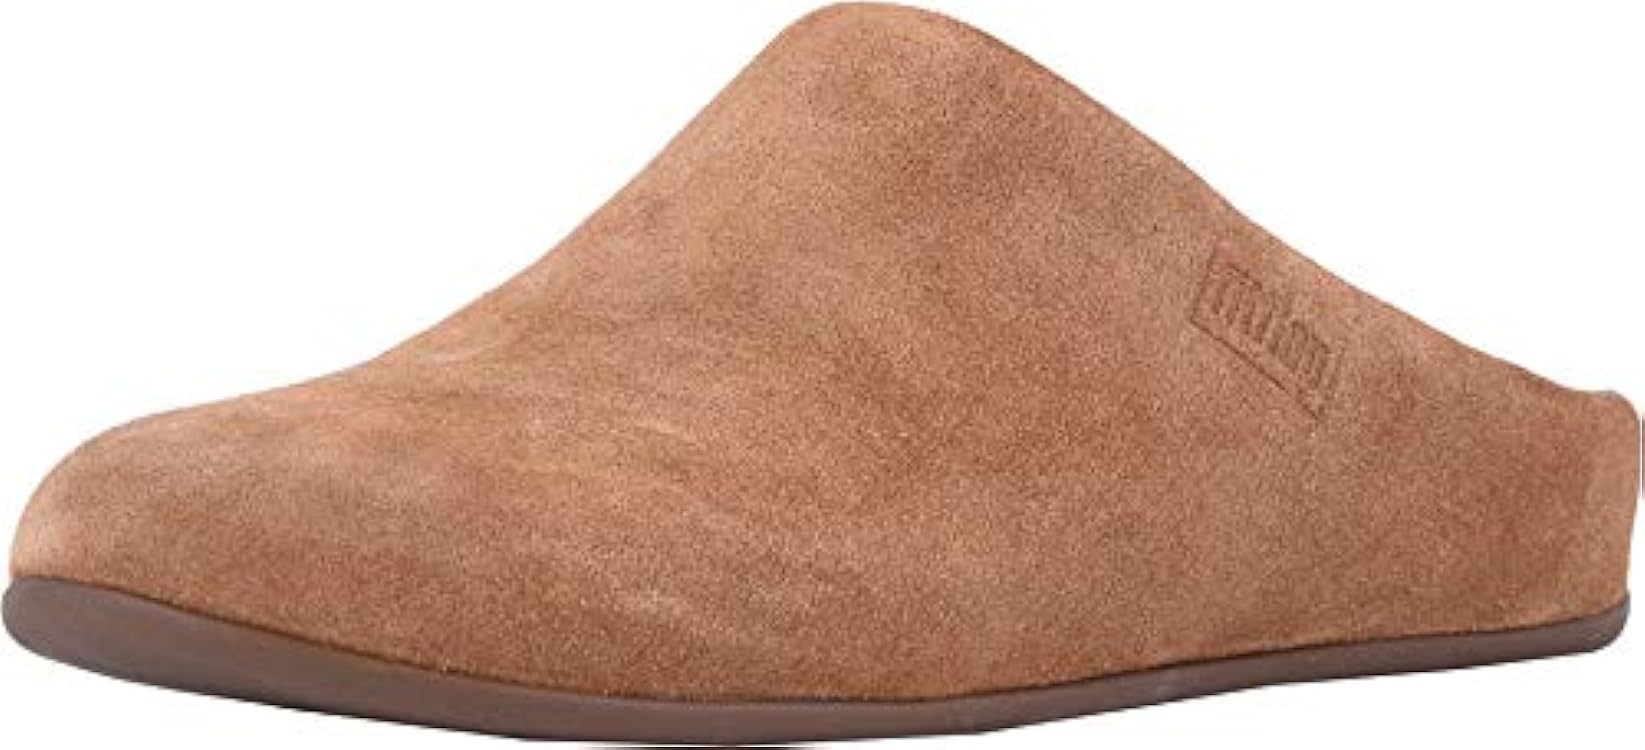 Fitflop Chrissie Shearling, Pantofole Donna 779389059